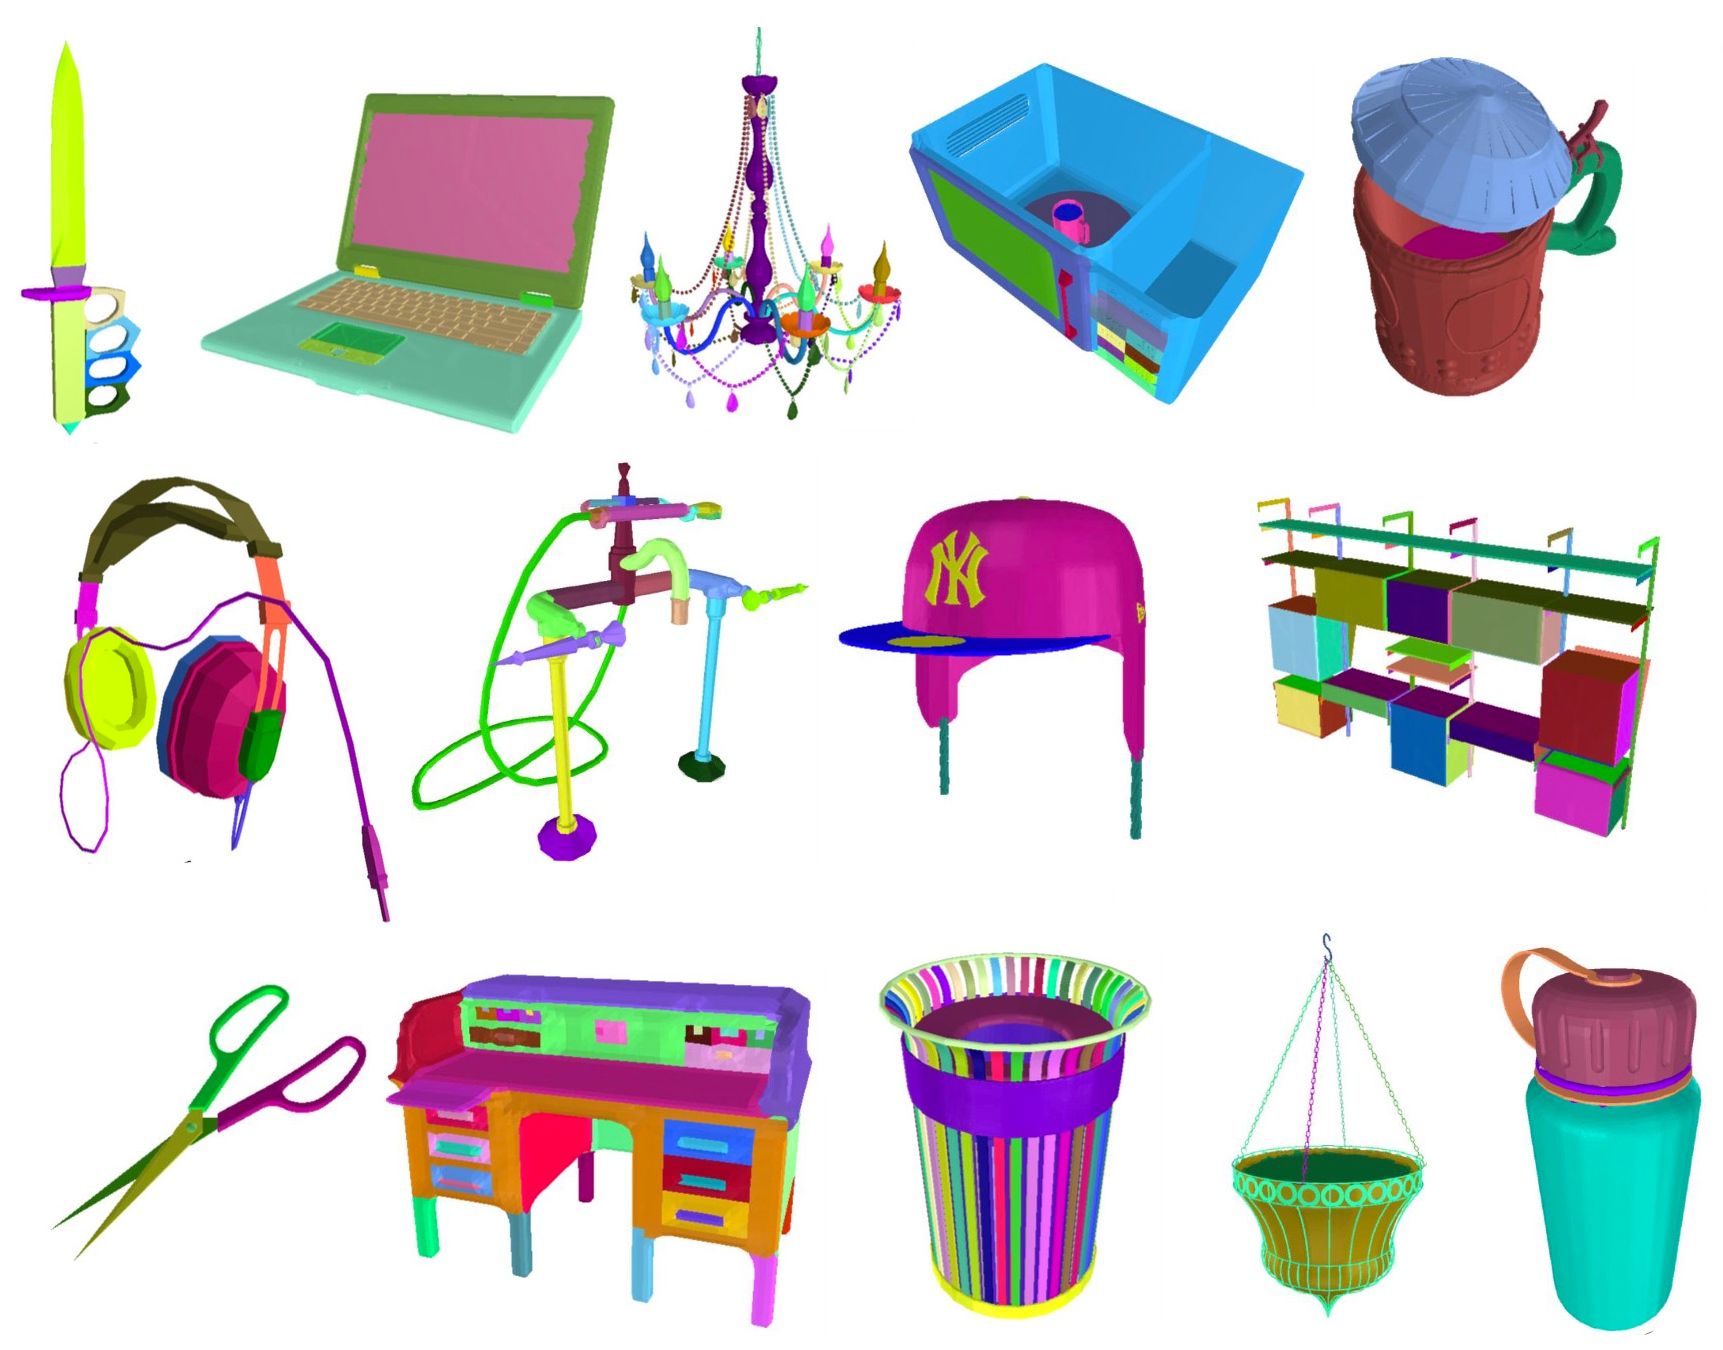 PartNet is a consistent, large-scale dataset of 3D objects annotated with fine-grained, instance-level, and hierarchical 3D part information